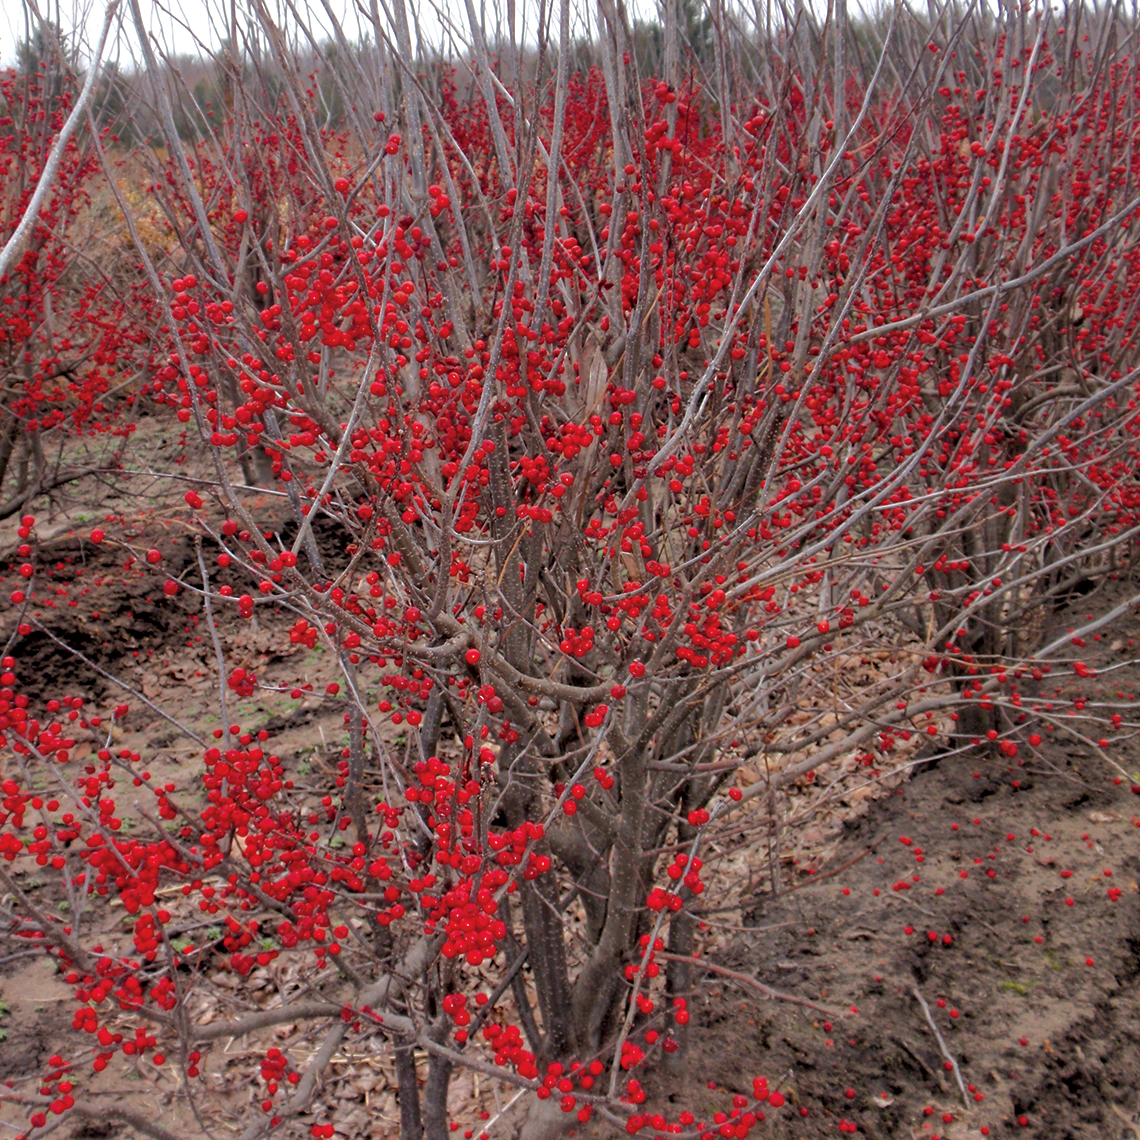 Row of Sparkleberry holly with red fruit in growing field